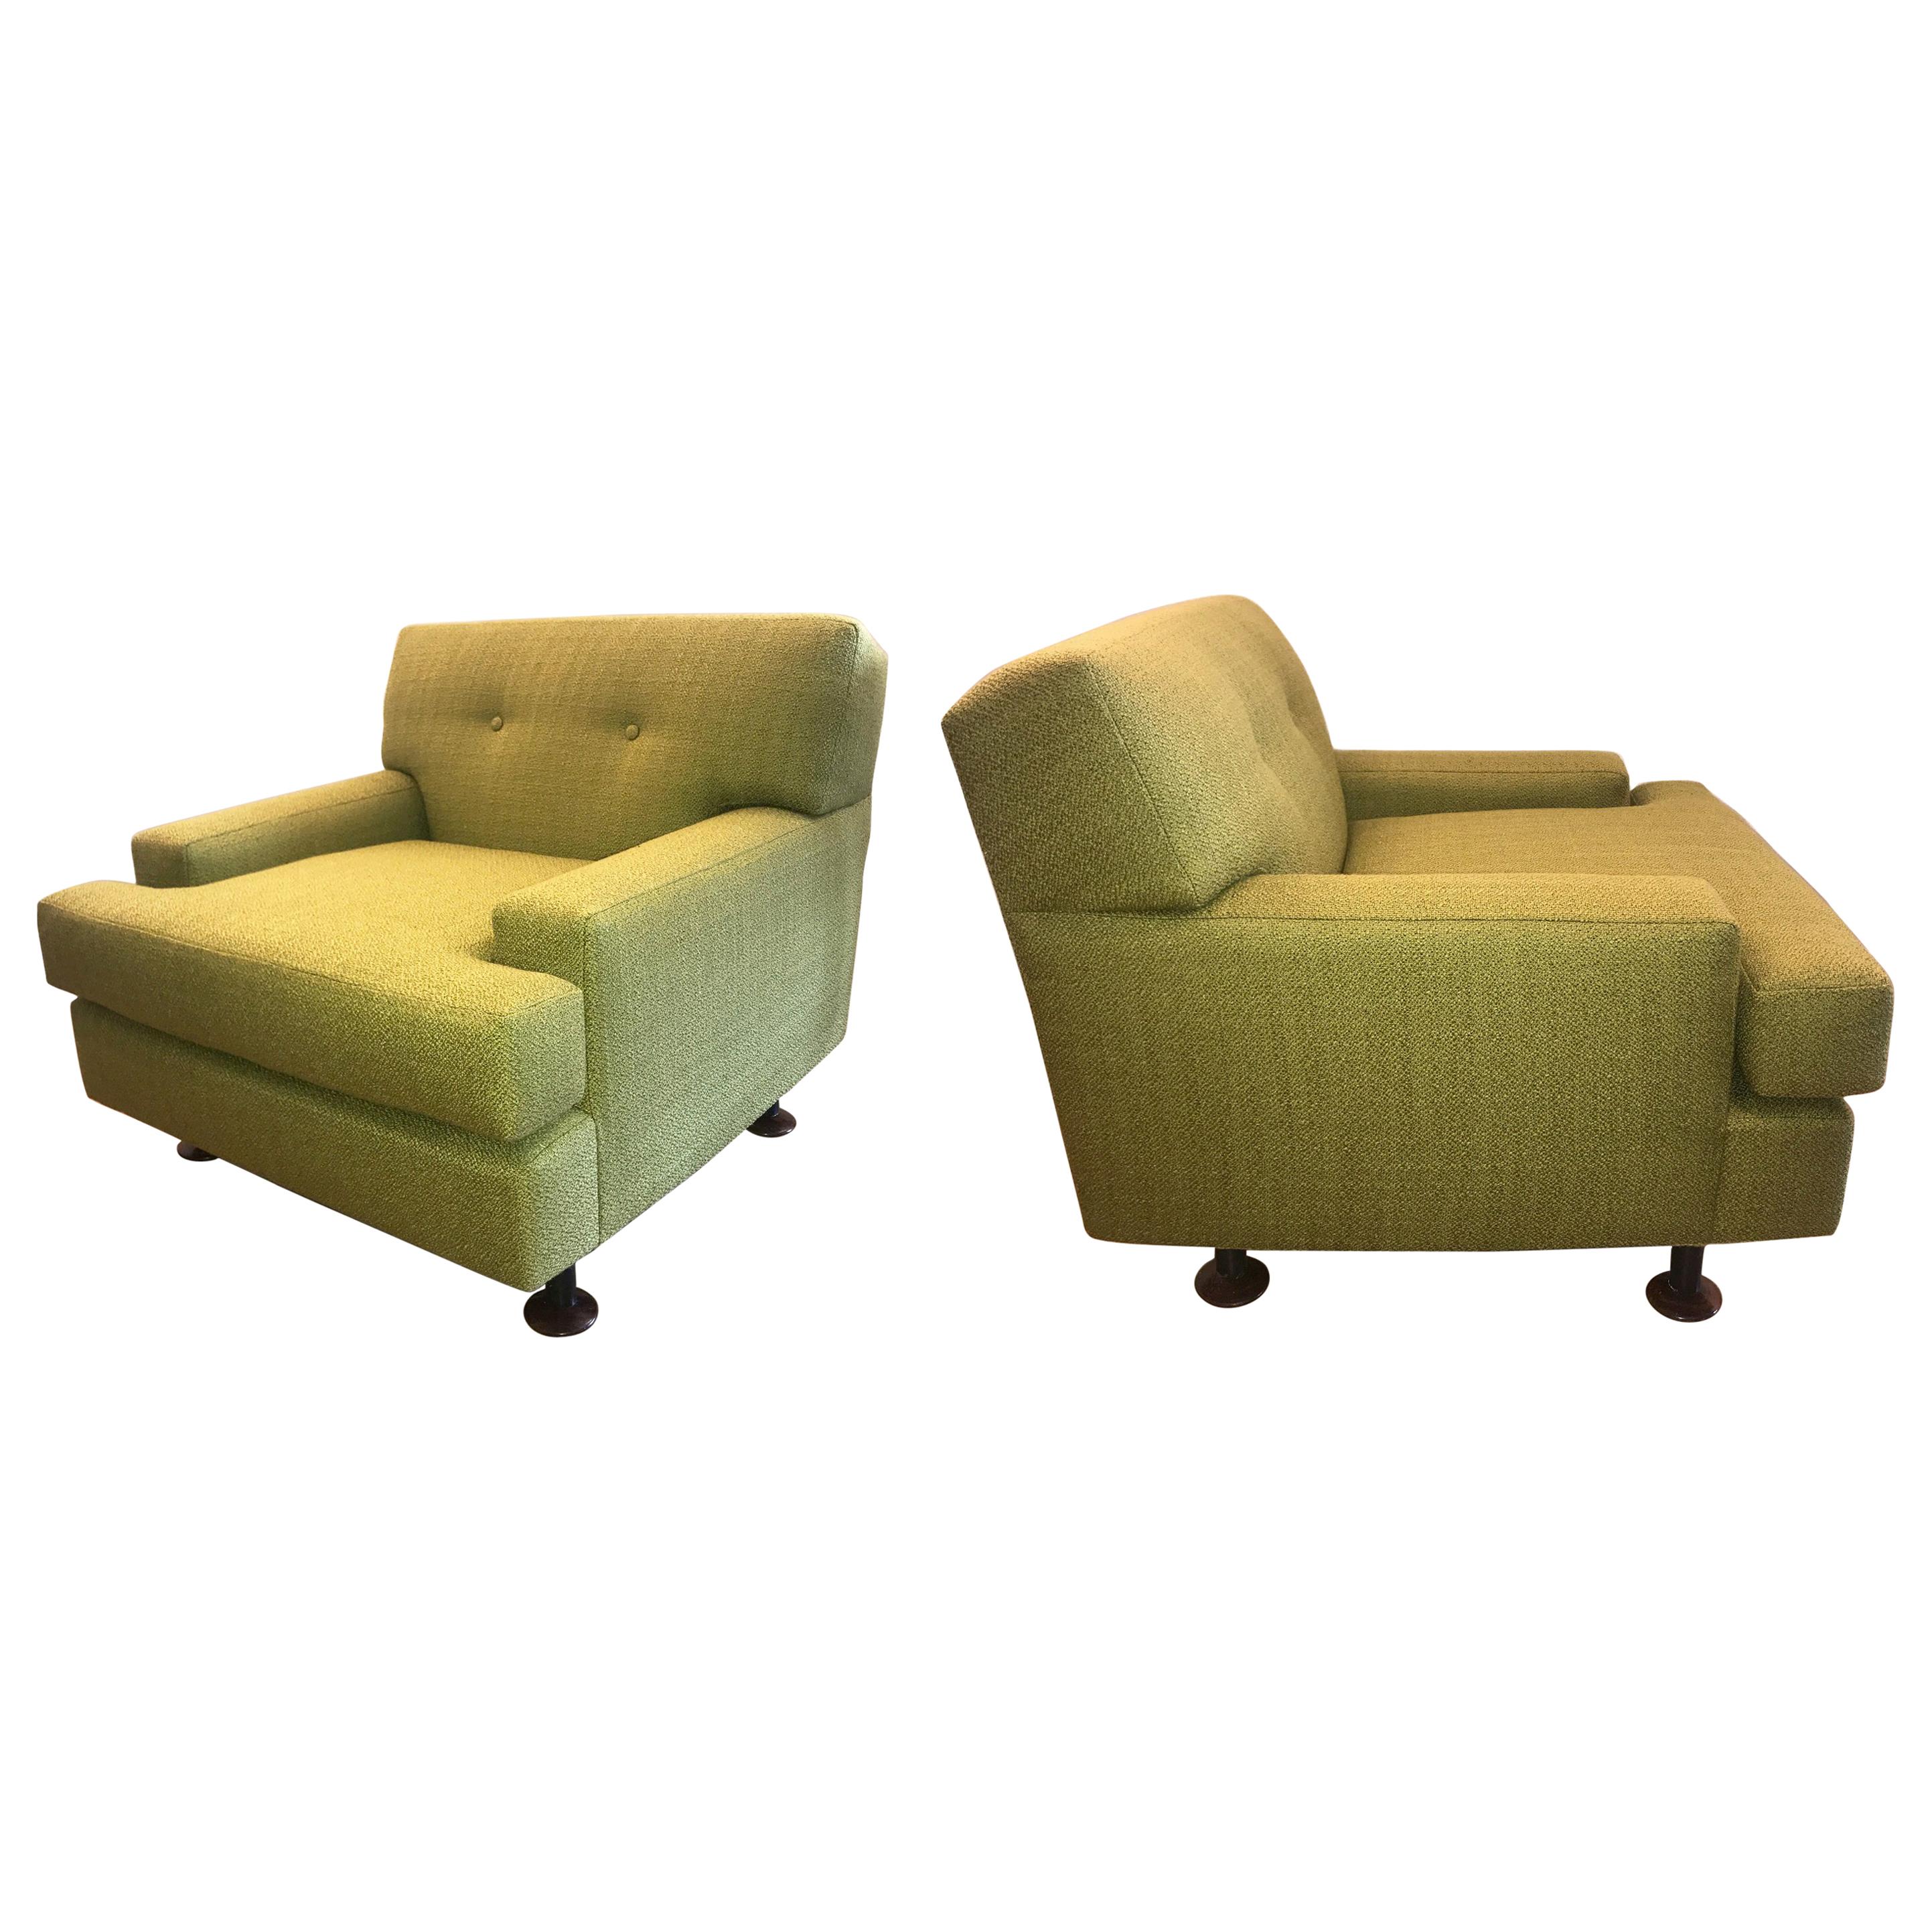 Marco Zanuso "Square Series" Pair of Lounge Chairs